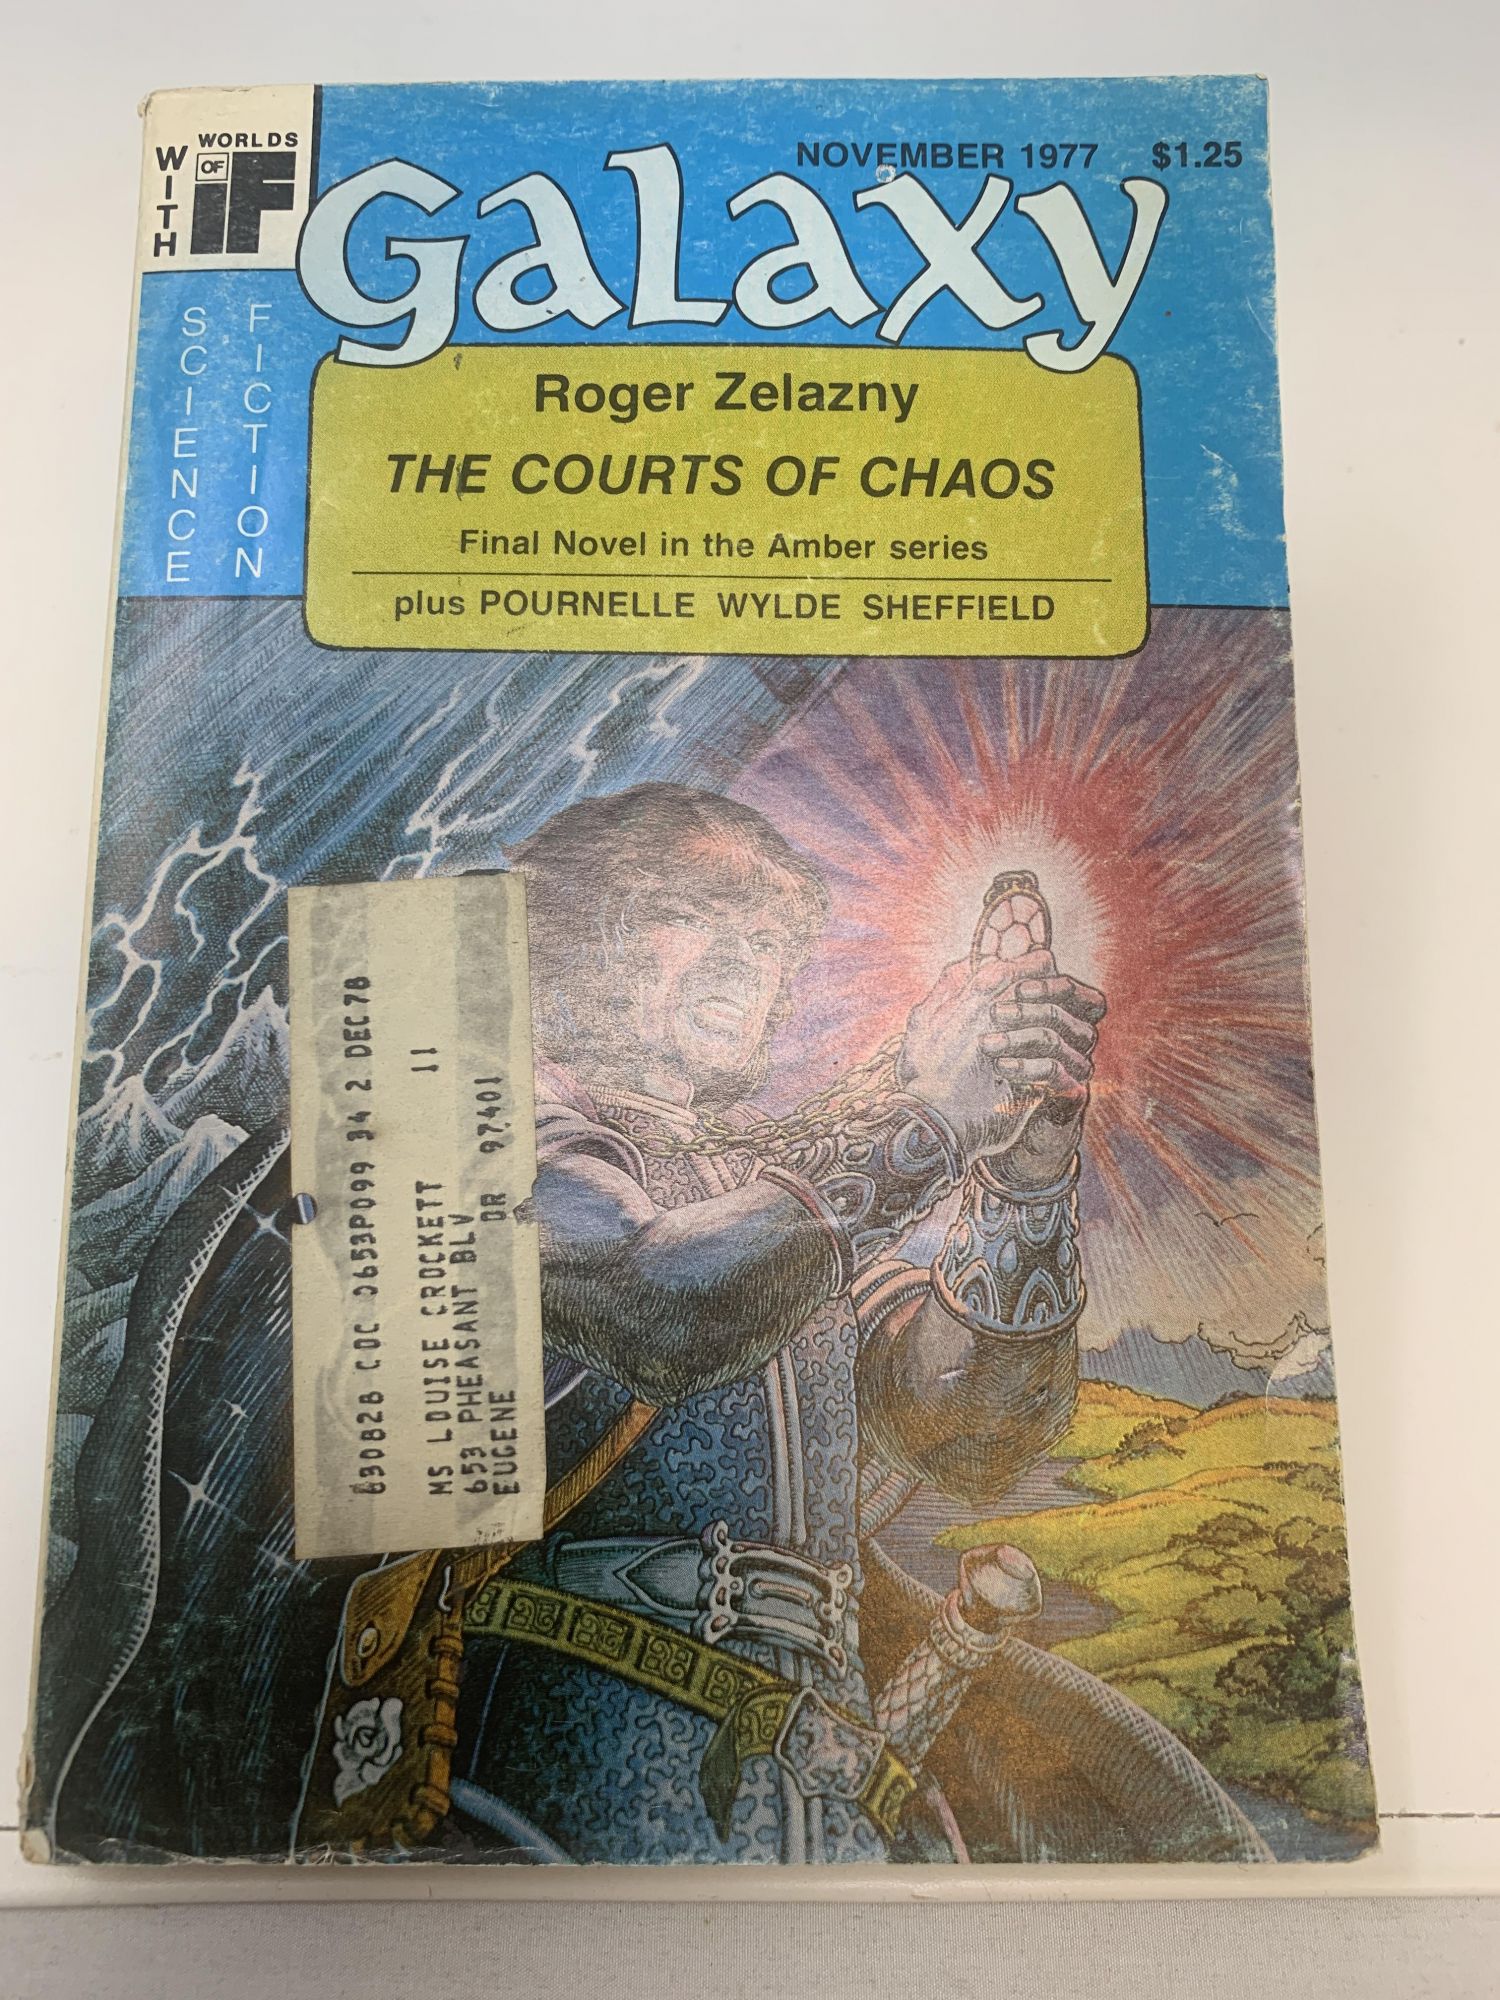 Zelazny, Roger - The Courts of Chaos (in Galaxy Science Fiction Magazine, Nov. 1977, Vol. 38, Number 9)